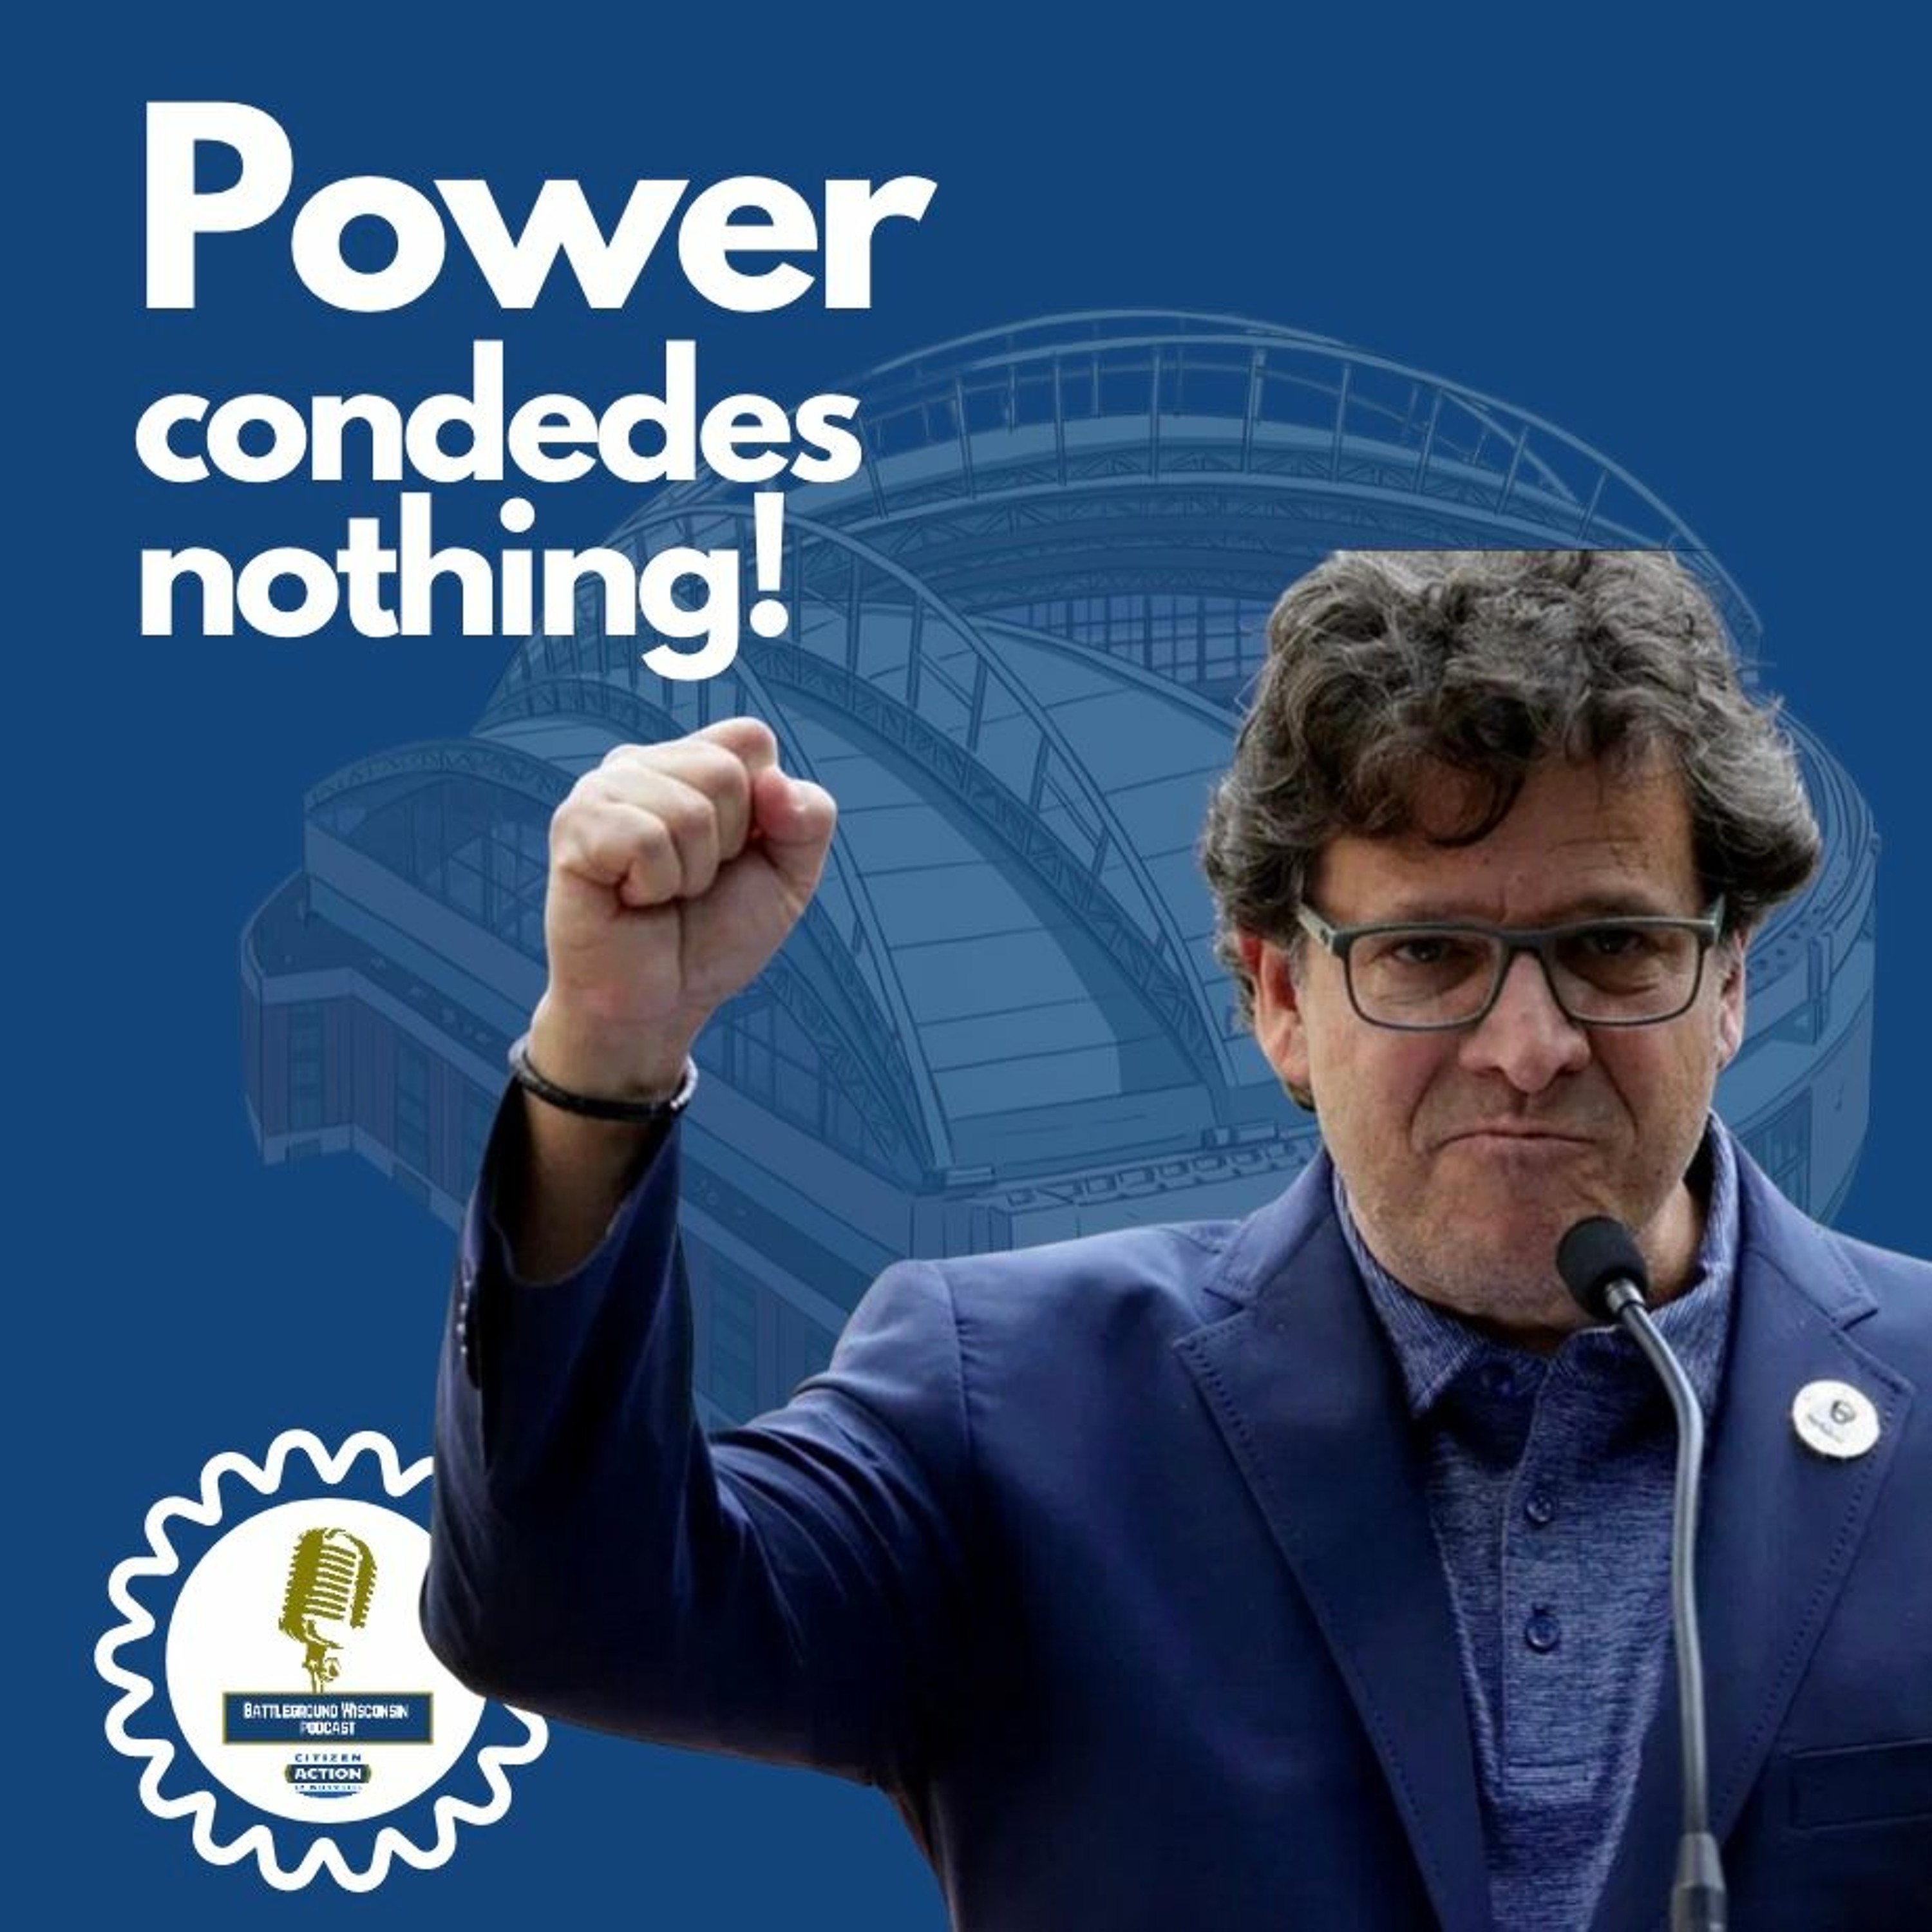 Power concedes nothing